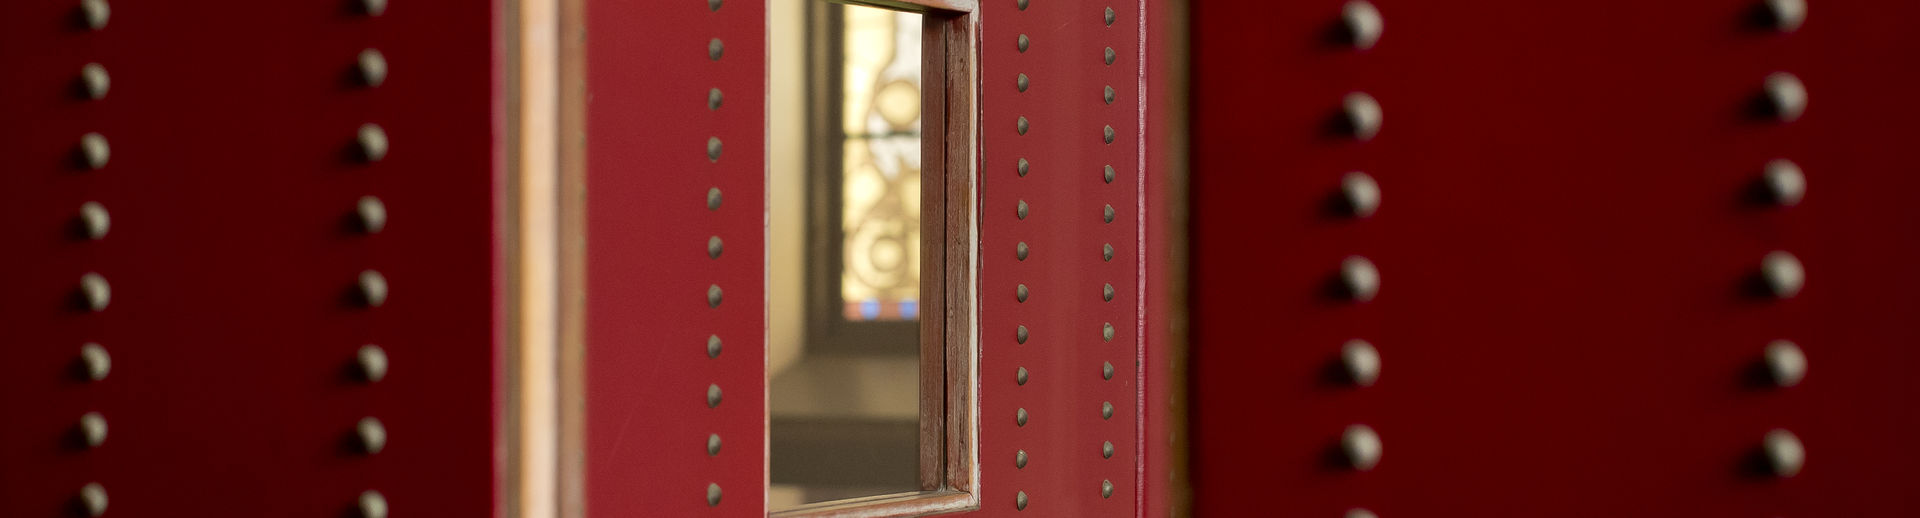 A close up of a mirror within a red frame and a wall laden with studs.